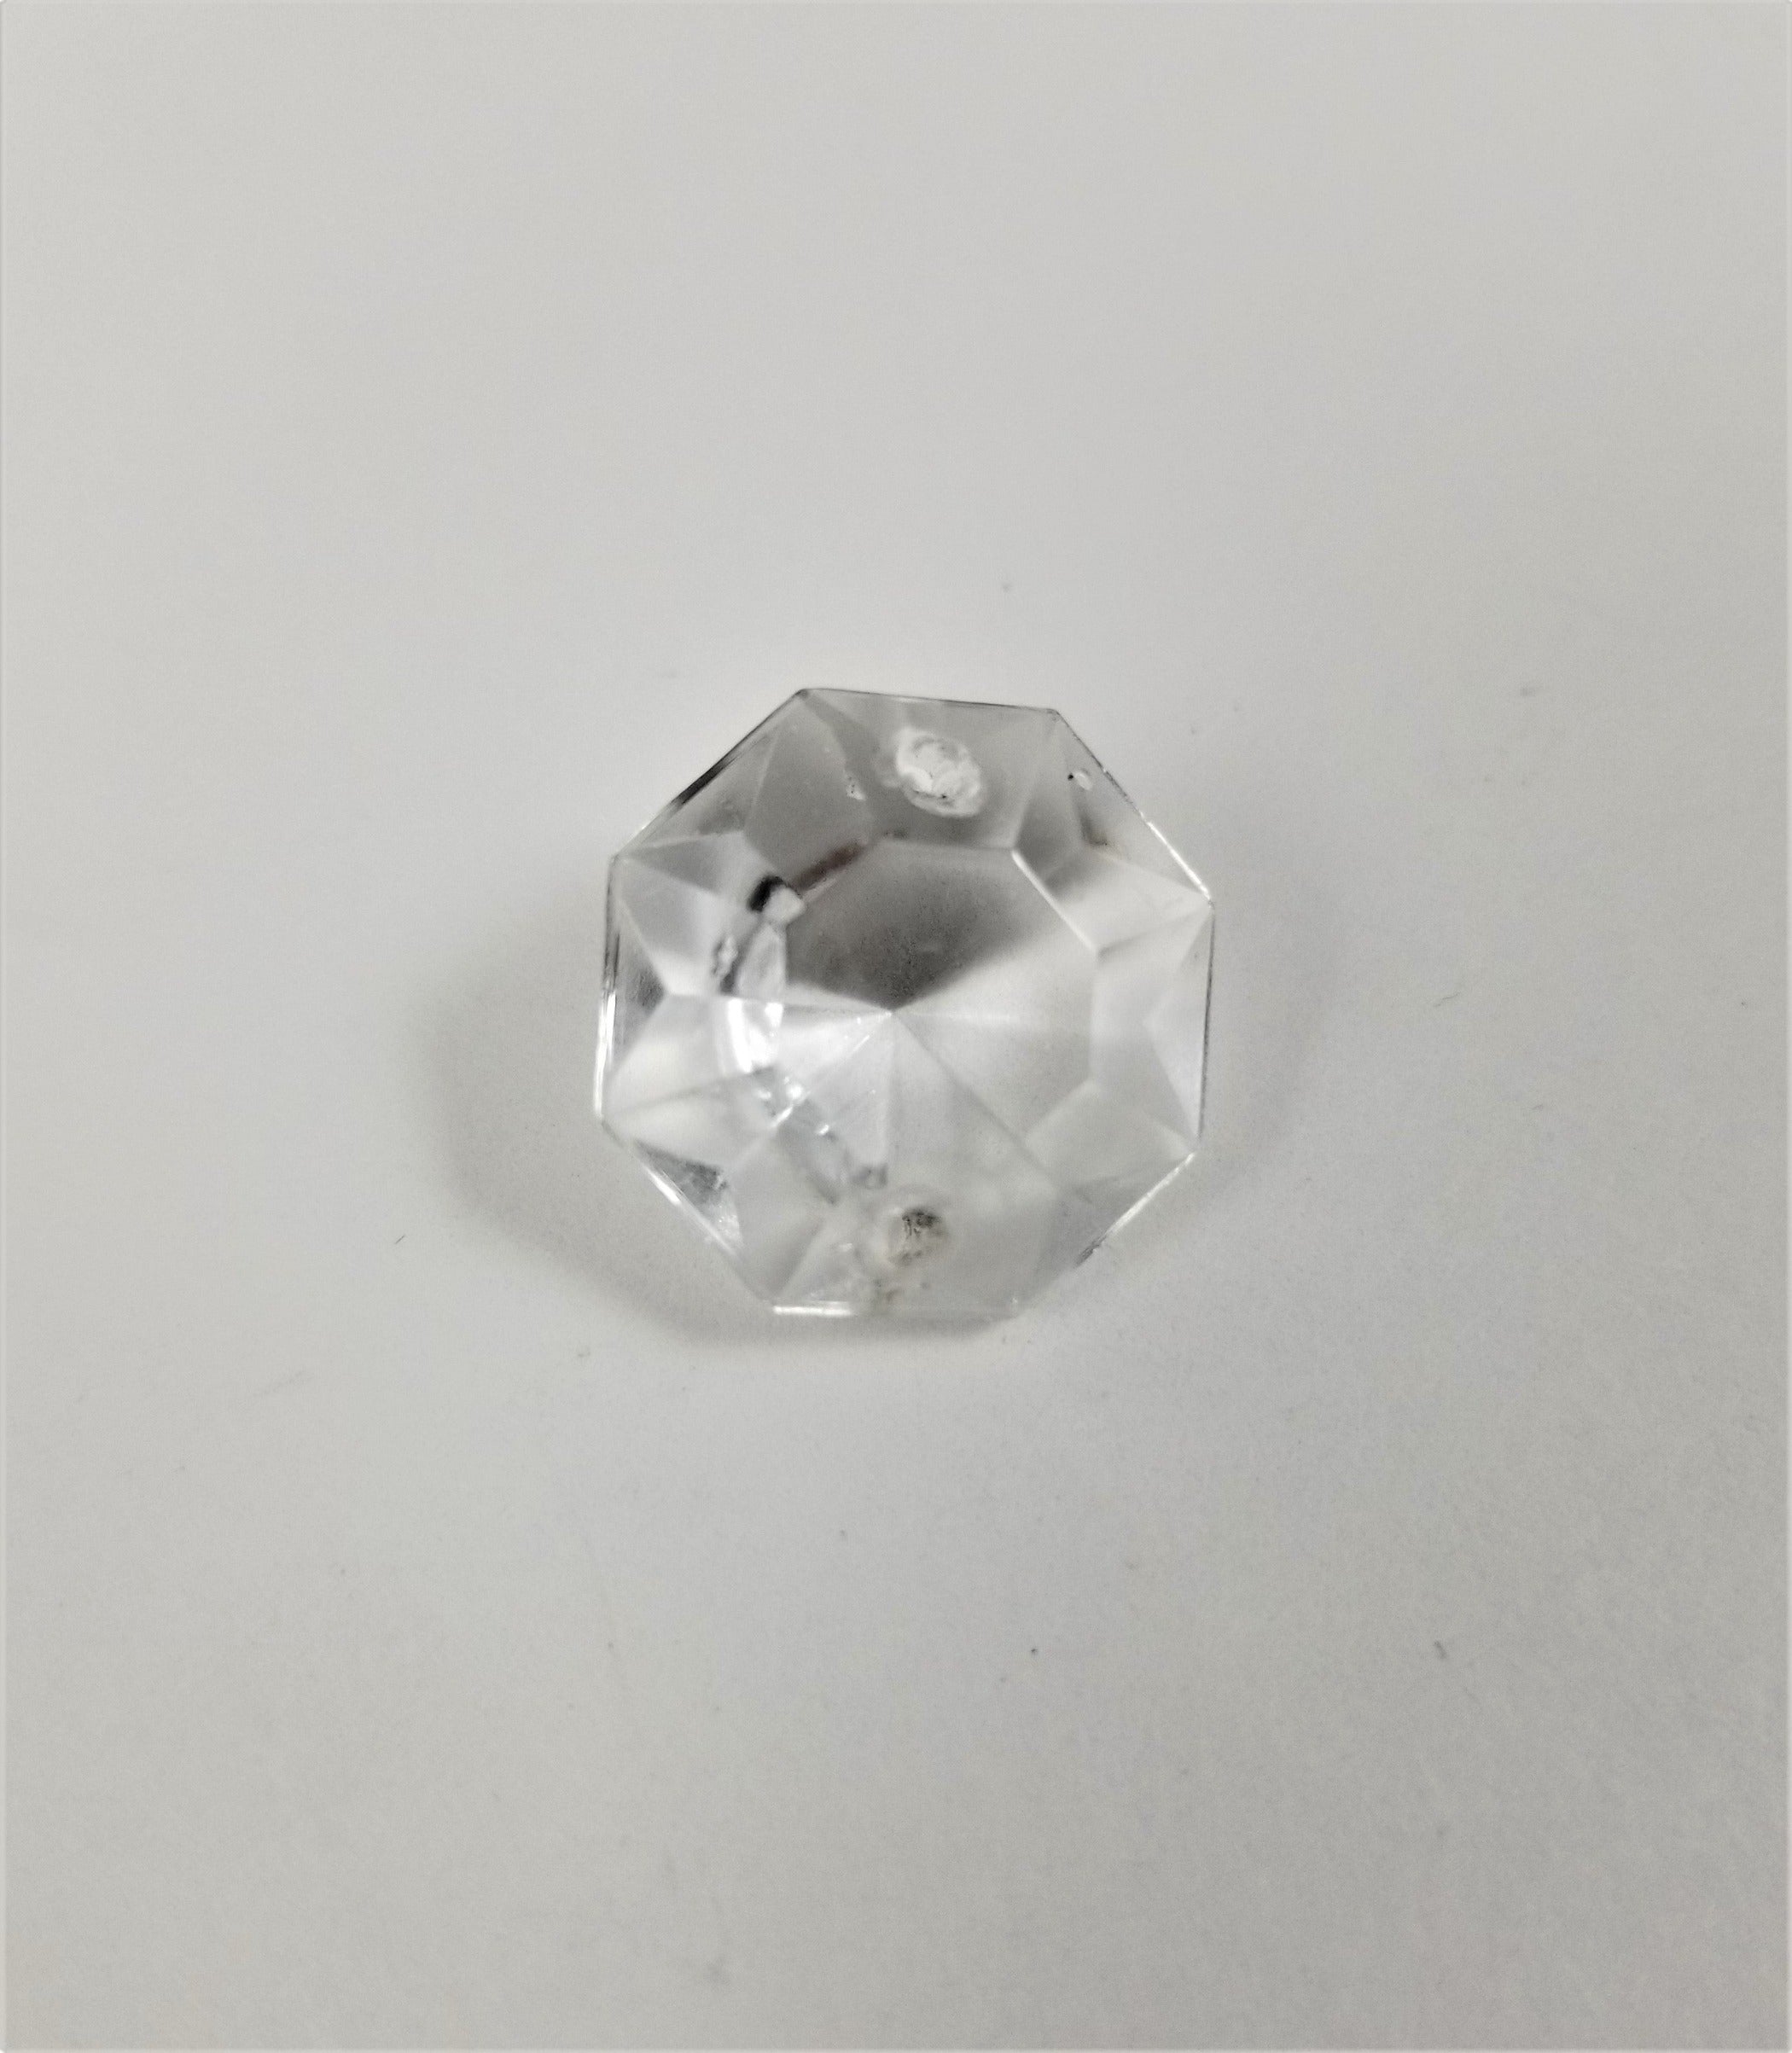 Octagonal Crystal Jewel with 2 hole ends - IMPORTED